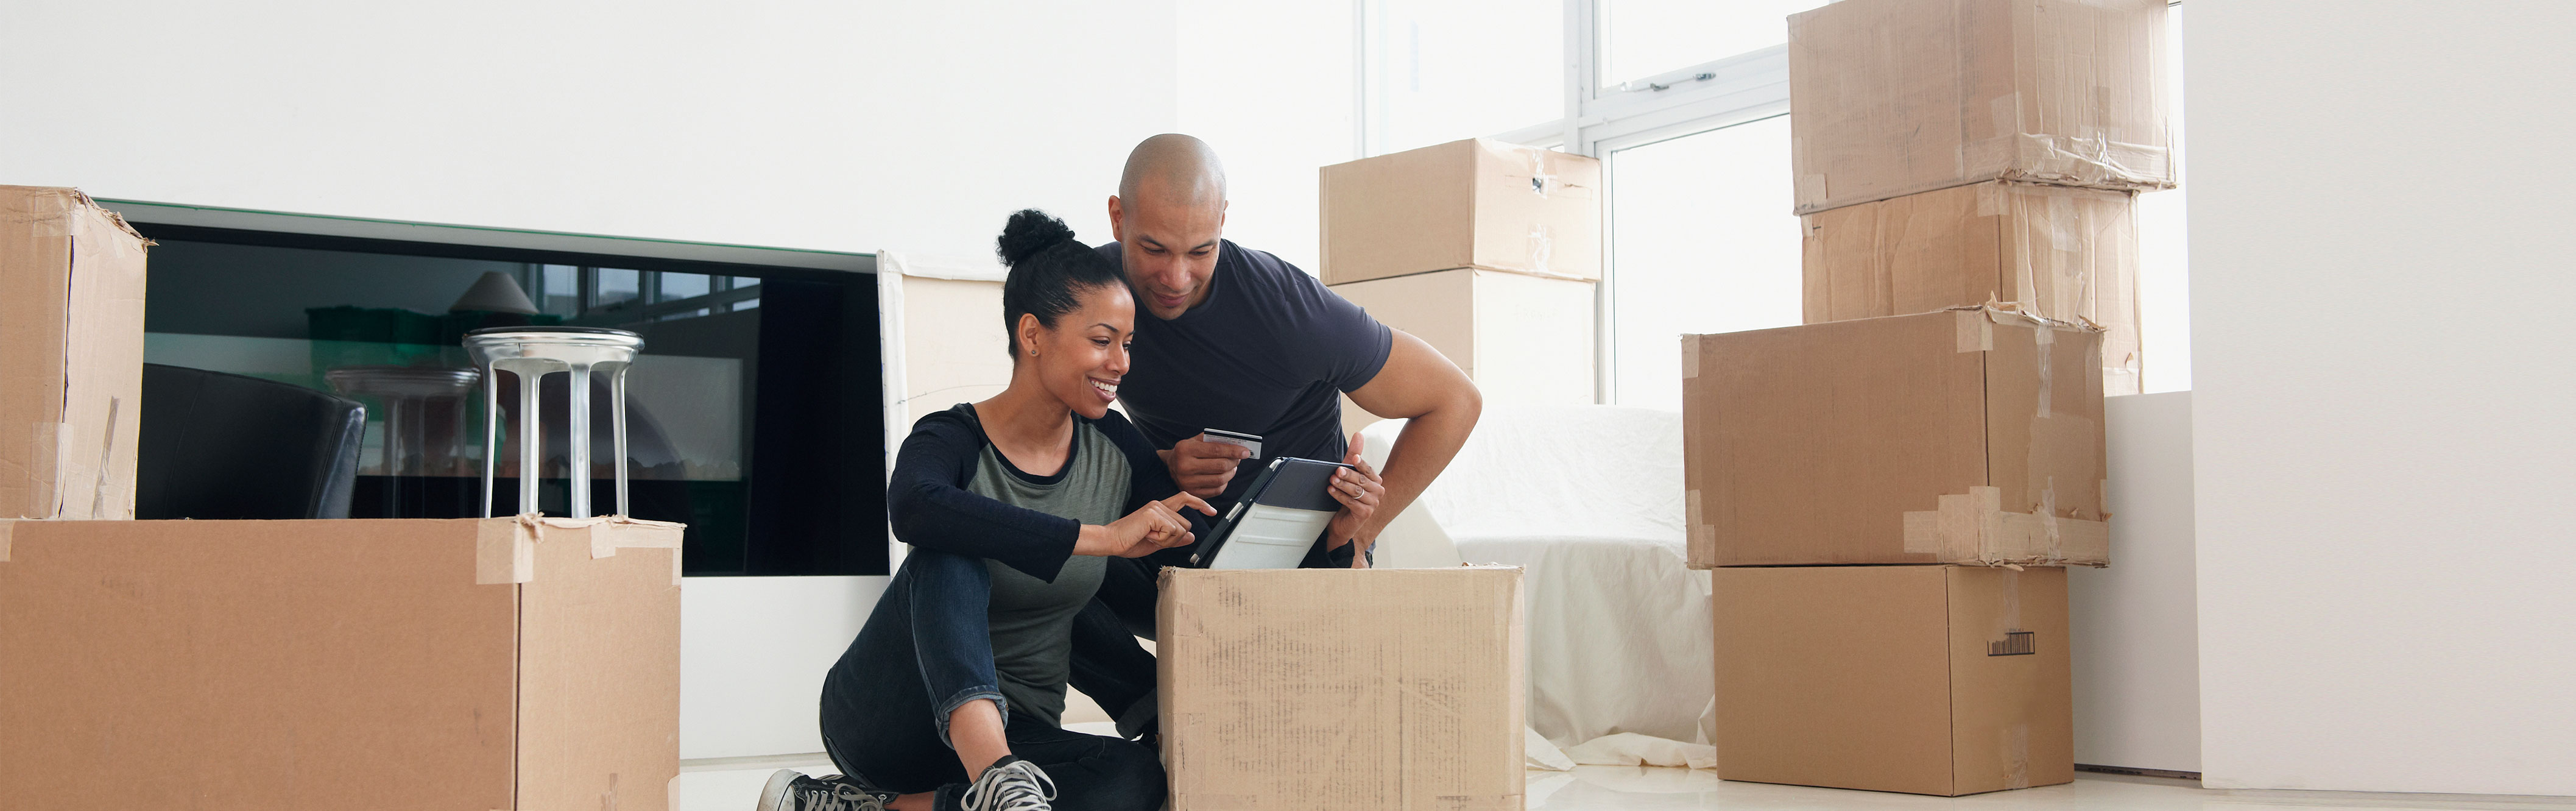 6 ways to save money on your move
